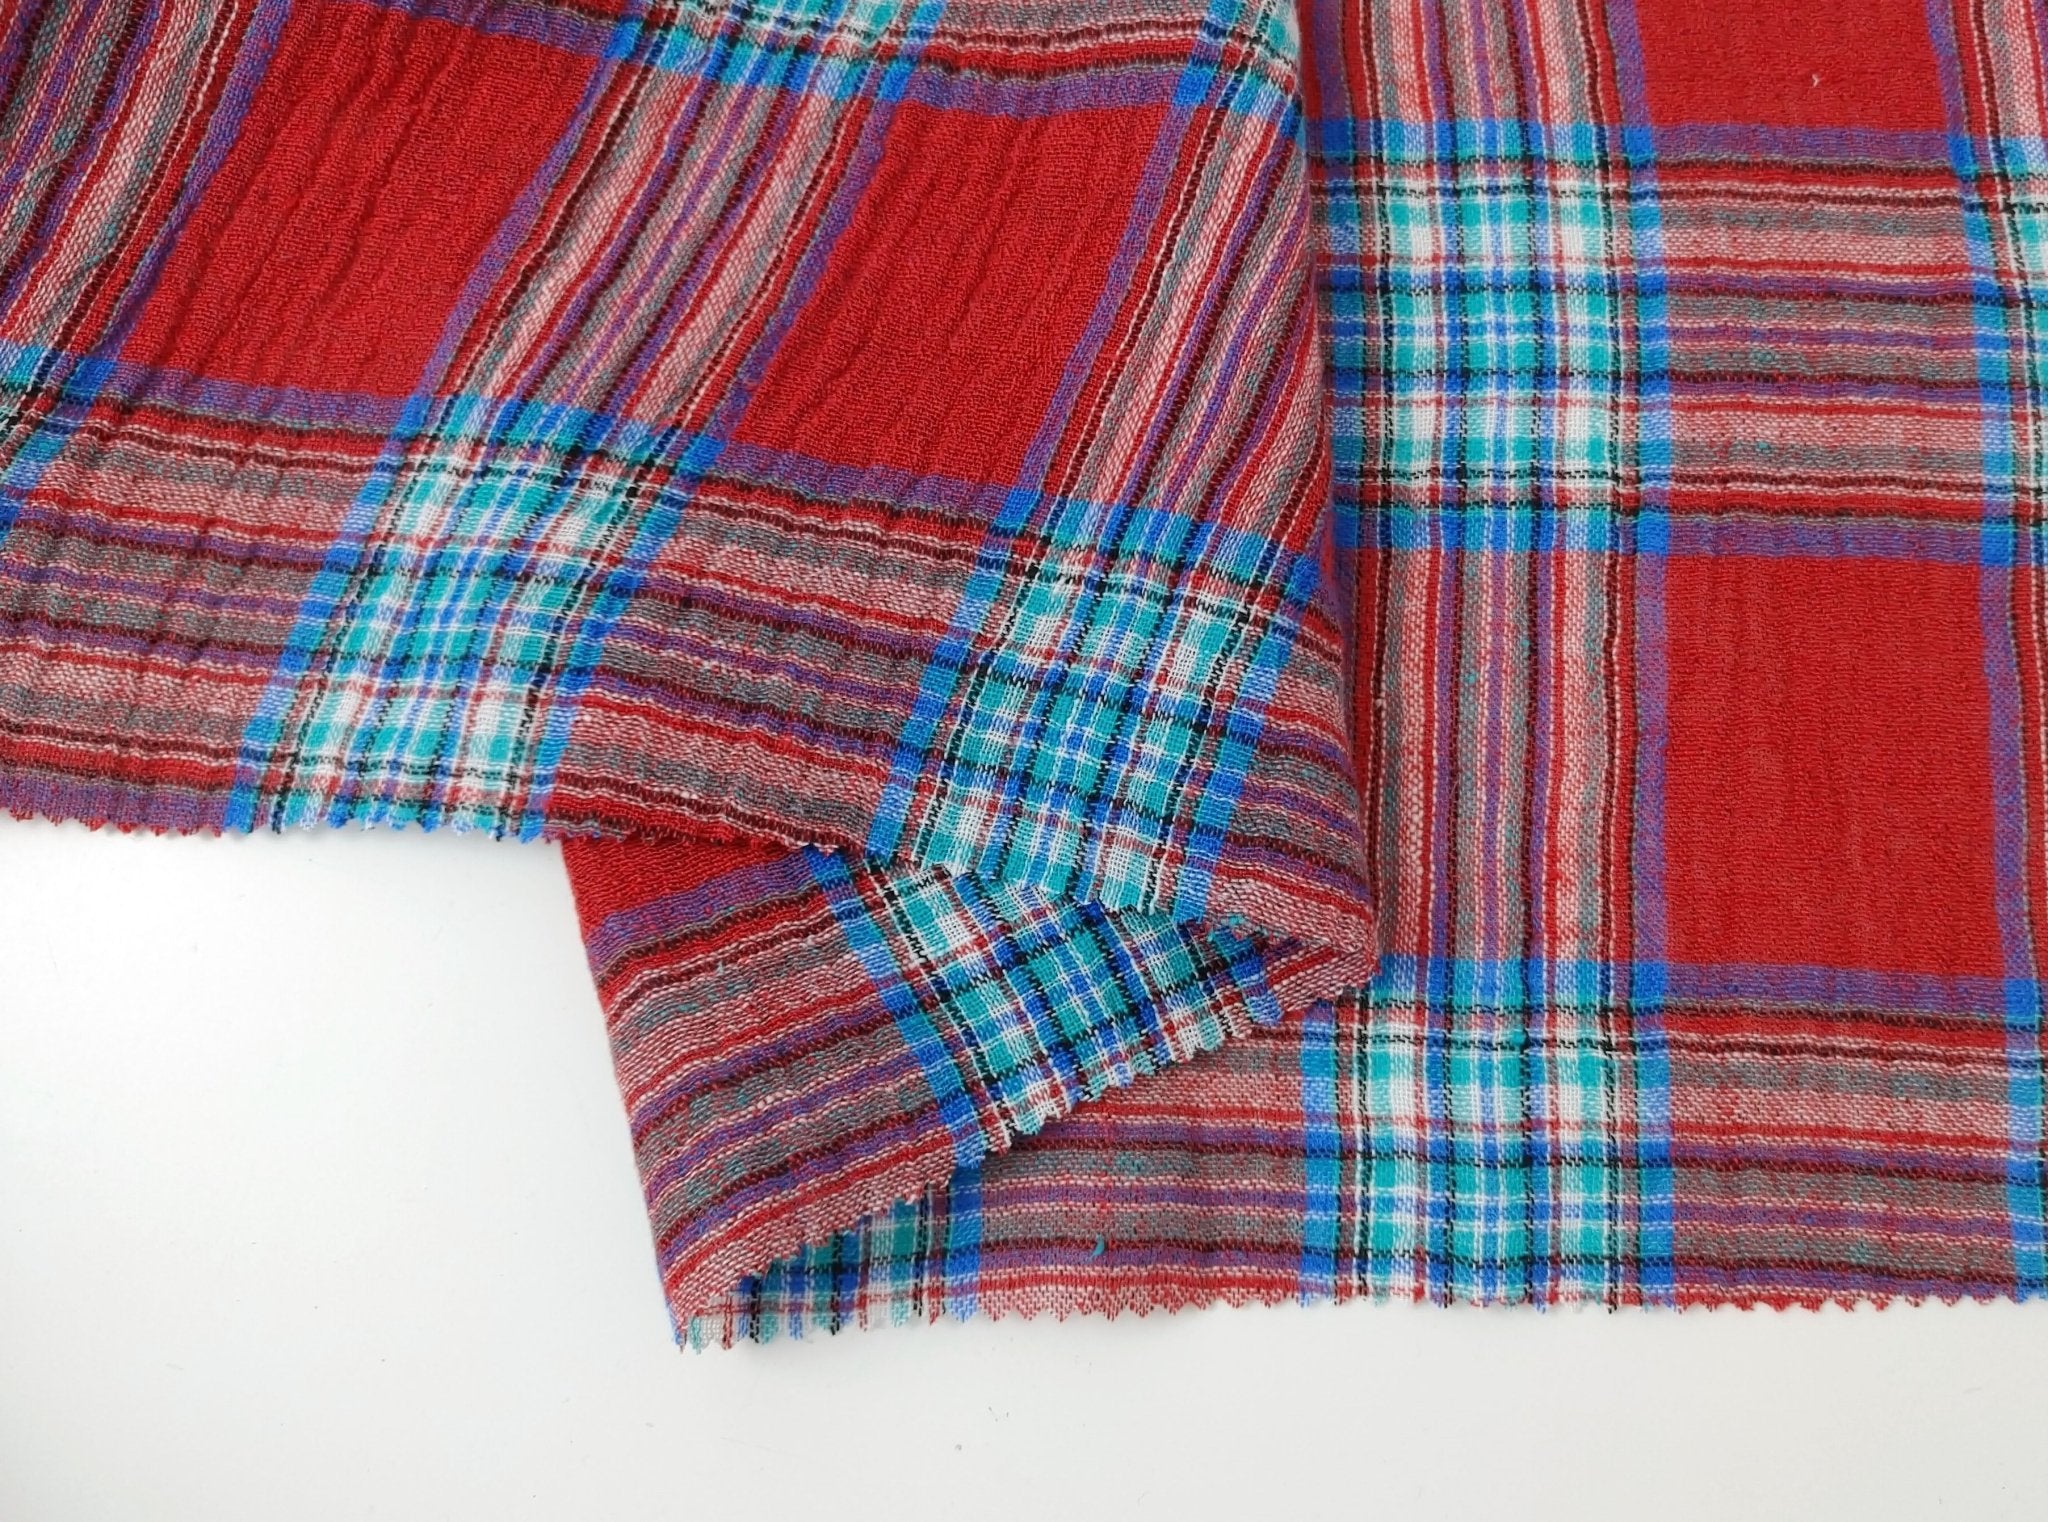 Vibrant Wrinkle-Textured Plaid: Linen Polyester Blend for Effortless Style 7580 - The Linen Lab - Red